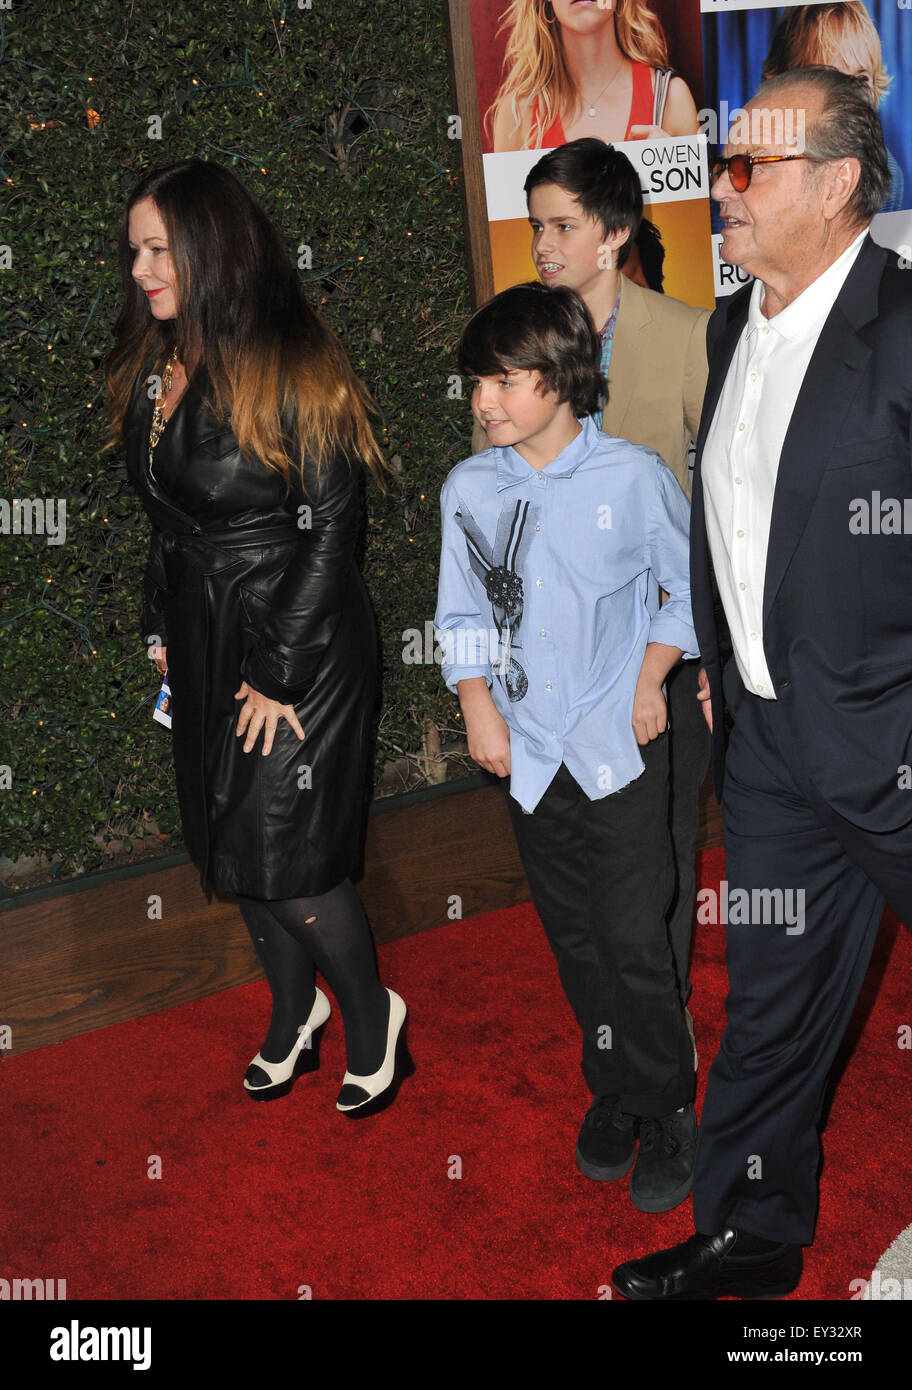 LOS ANGELES, CA - DECEMBER 13, 2010: Jack Nicholson & daughter Jennifer Nicholson & her sons at the world premiere of his new movie 'How Do You Know' at the Mann Village Theatre, Westwood. Stock Photo